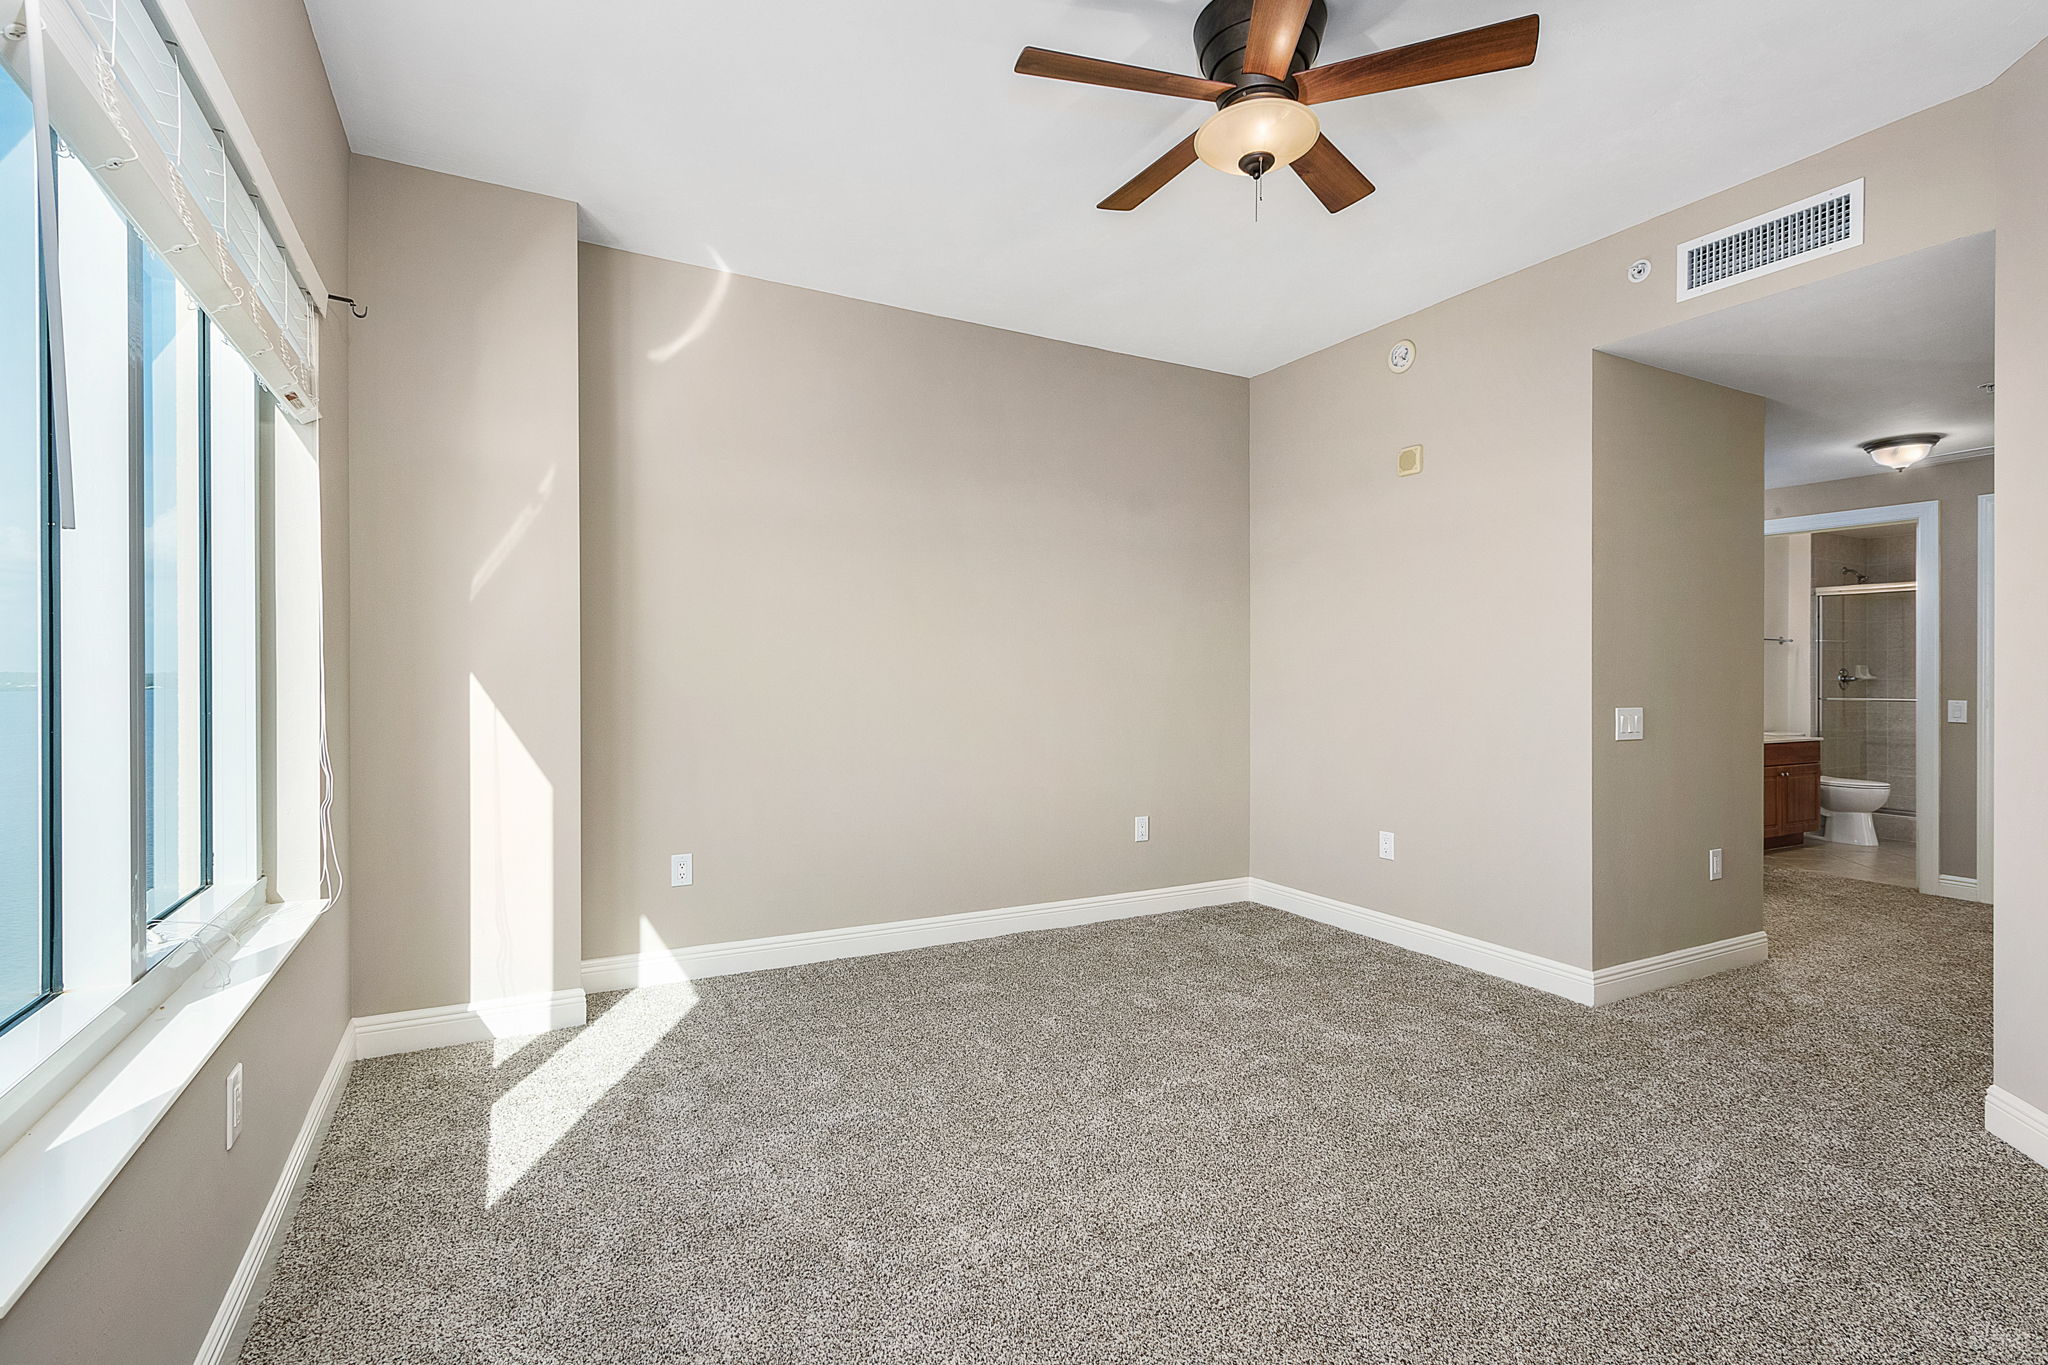  2745 First St Unit 1301, Fort Myers, FL 33916, US Photo 16